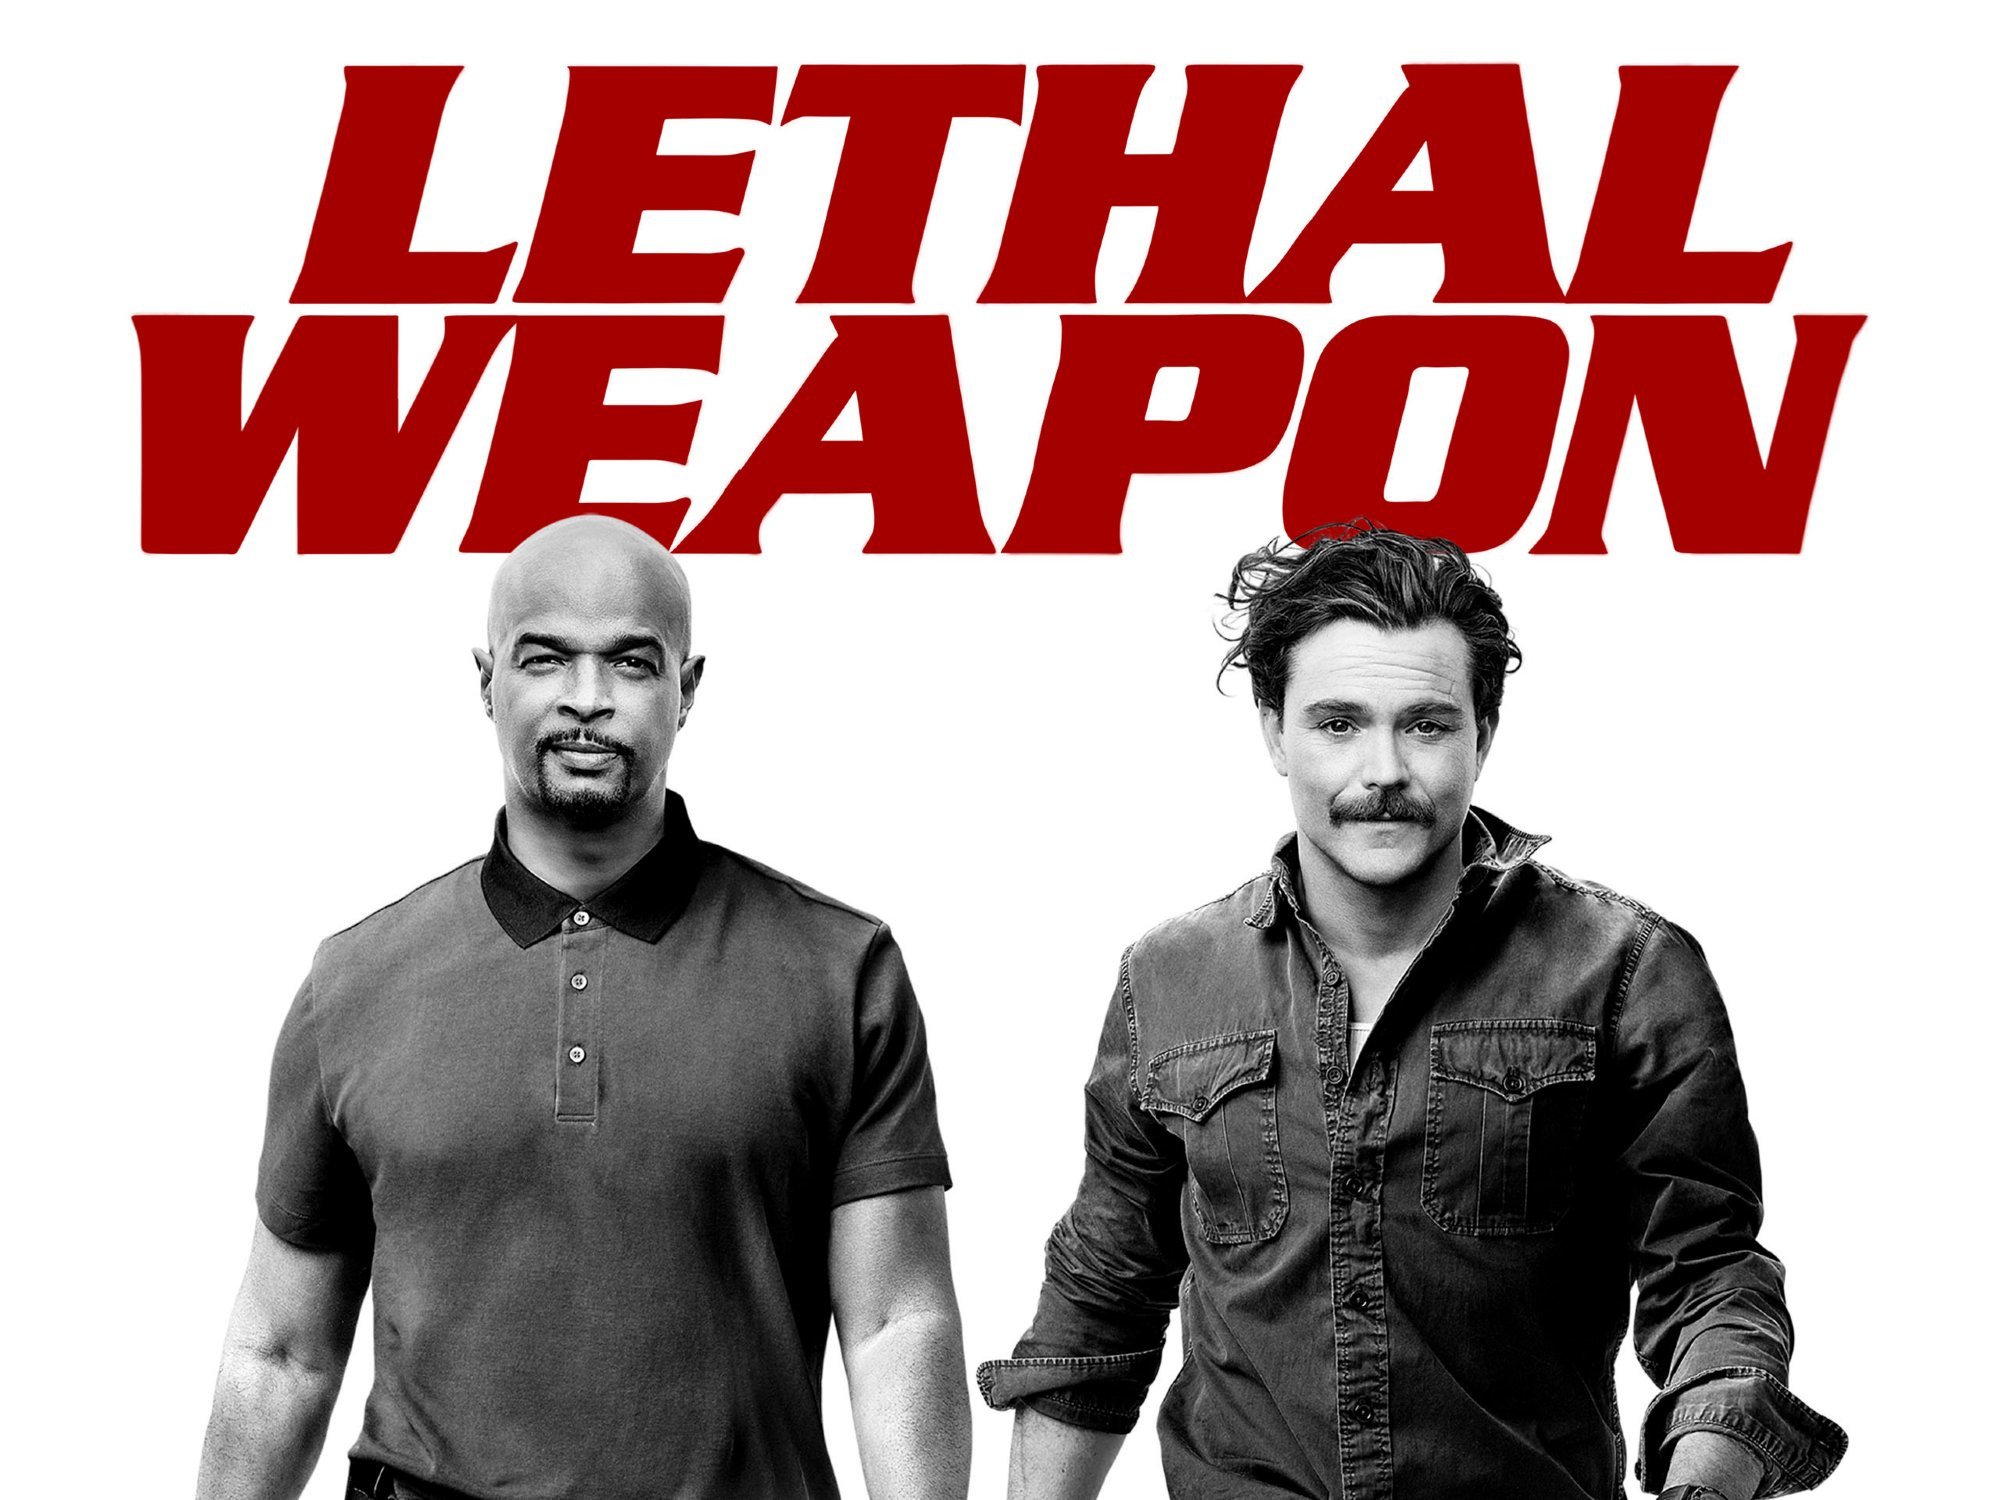 lethal weapon wallpaper,font,poster,movie,team,album cover